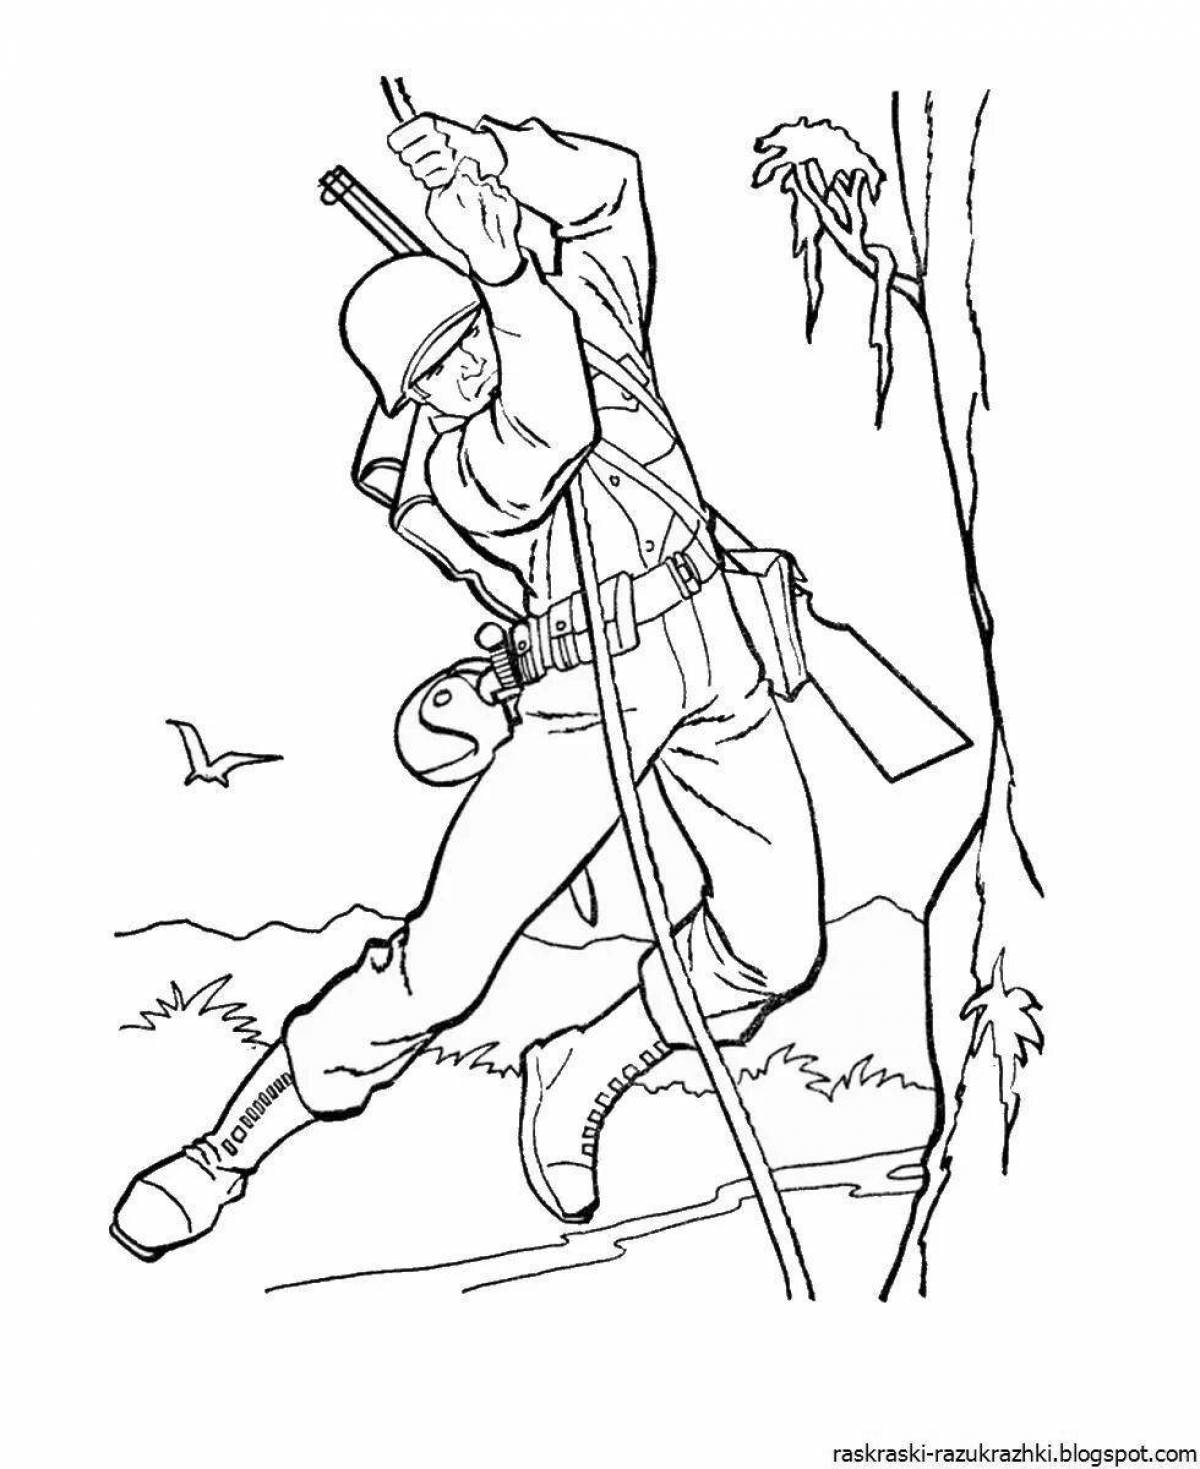 Impressive Russian soldier coloring page